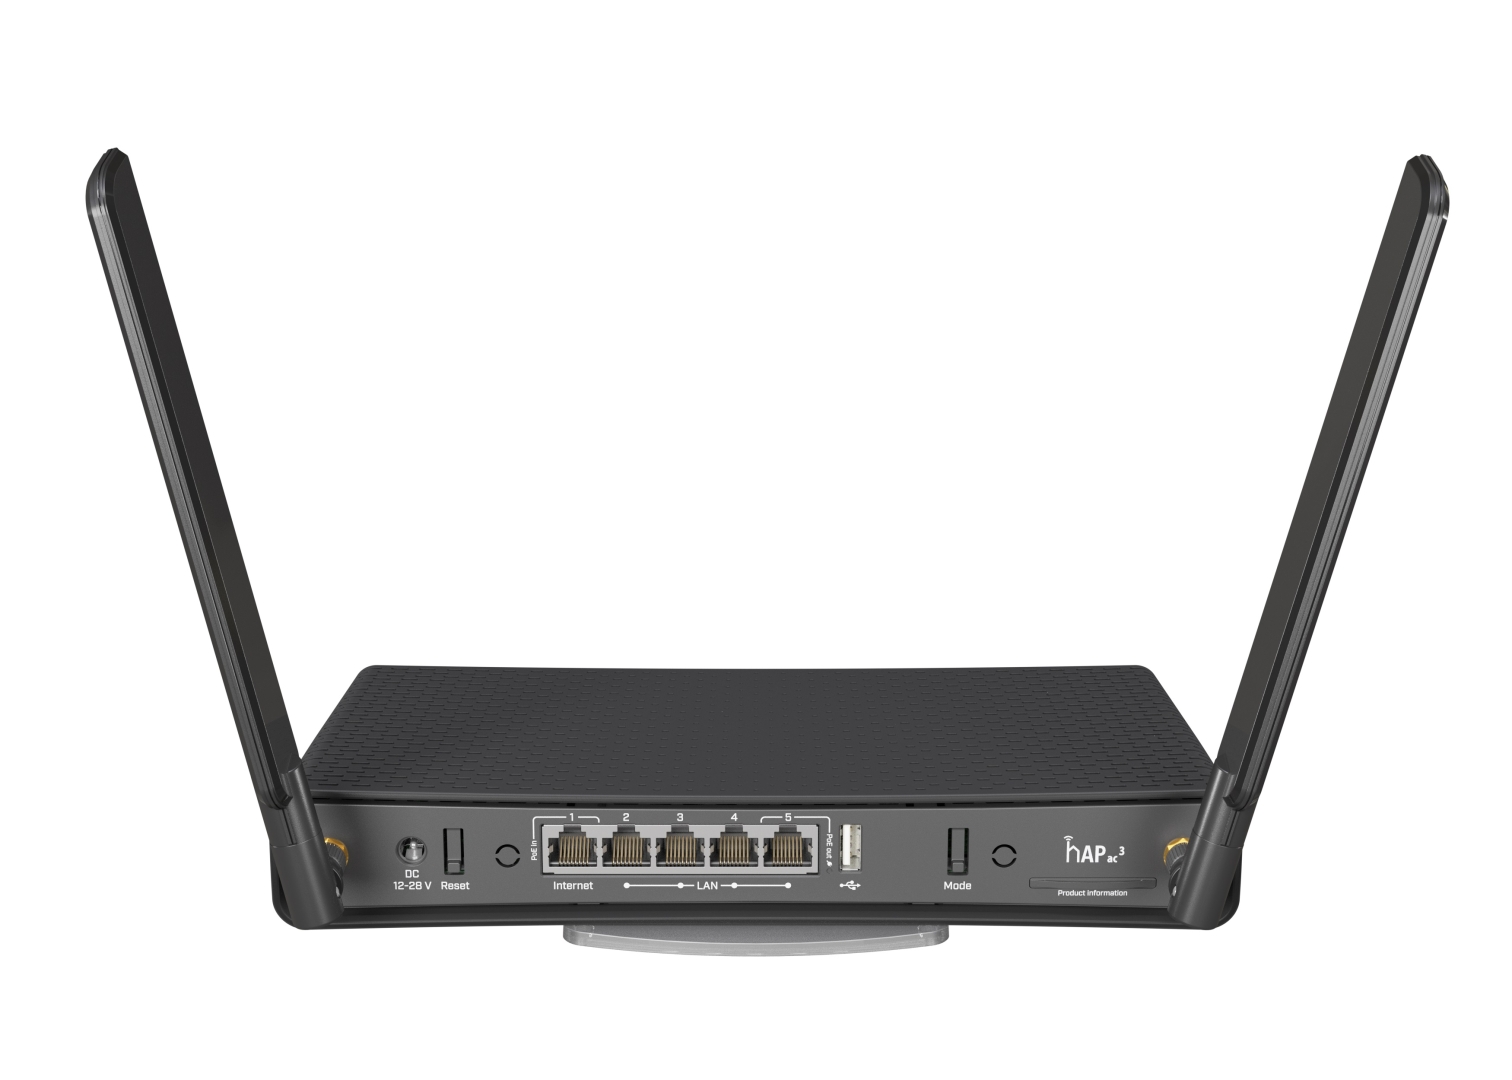 Mikrotik hap ac3- RBD53iG-5HacD2HnD A wireless dual-band router with 5 Gigabit Ethernet ports and ex